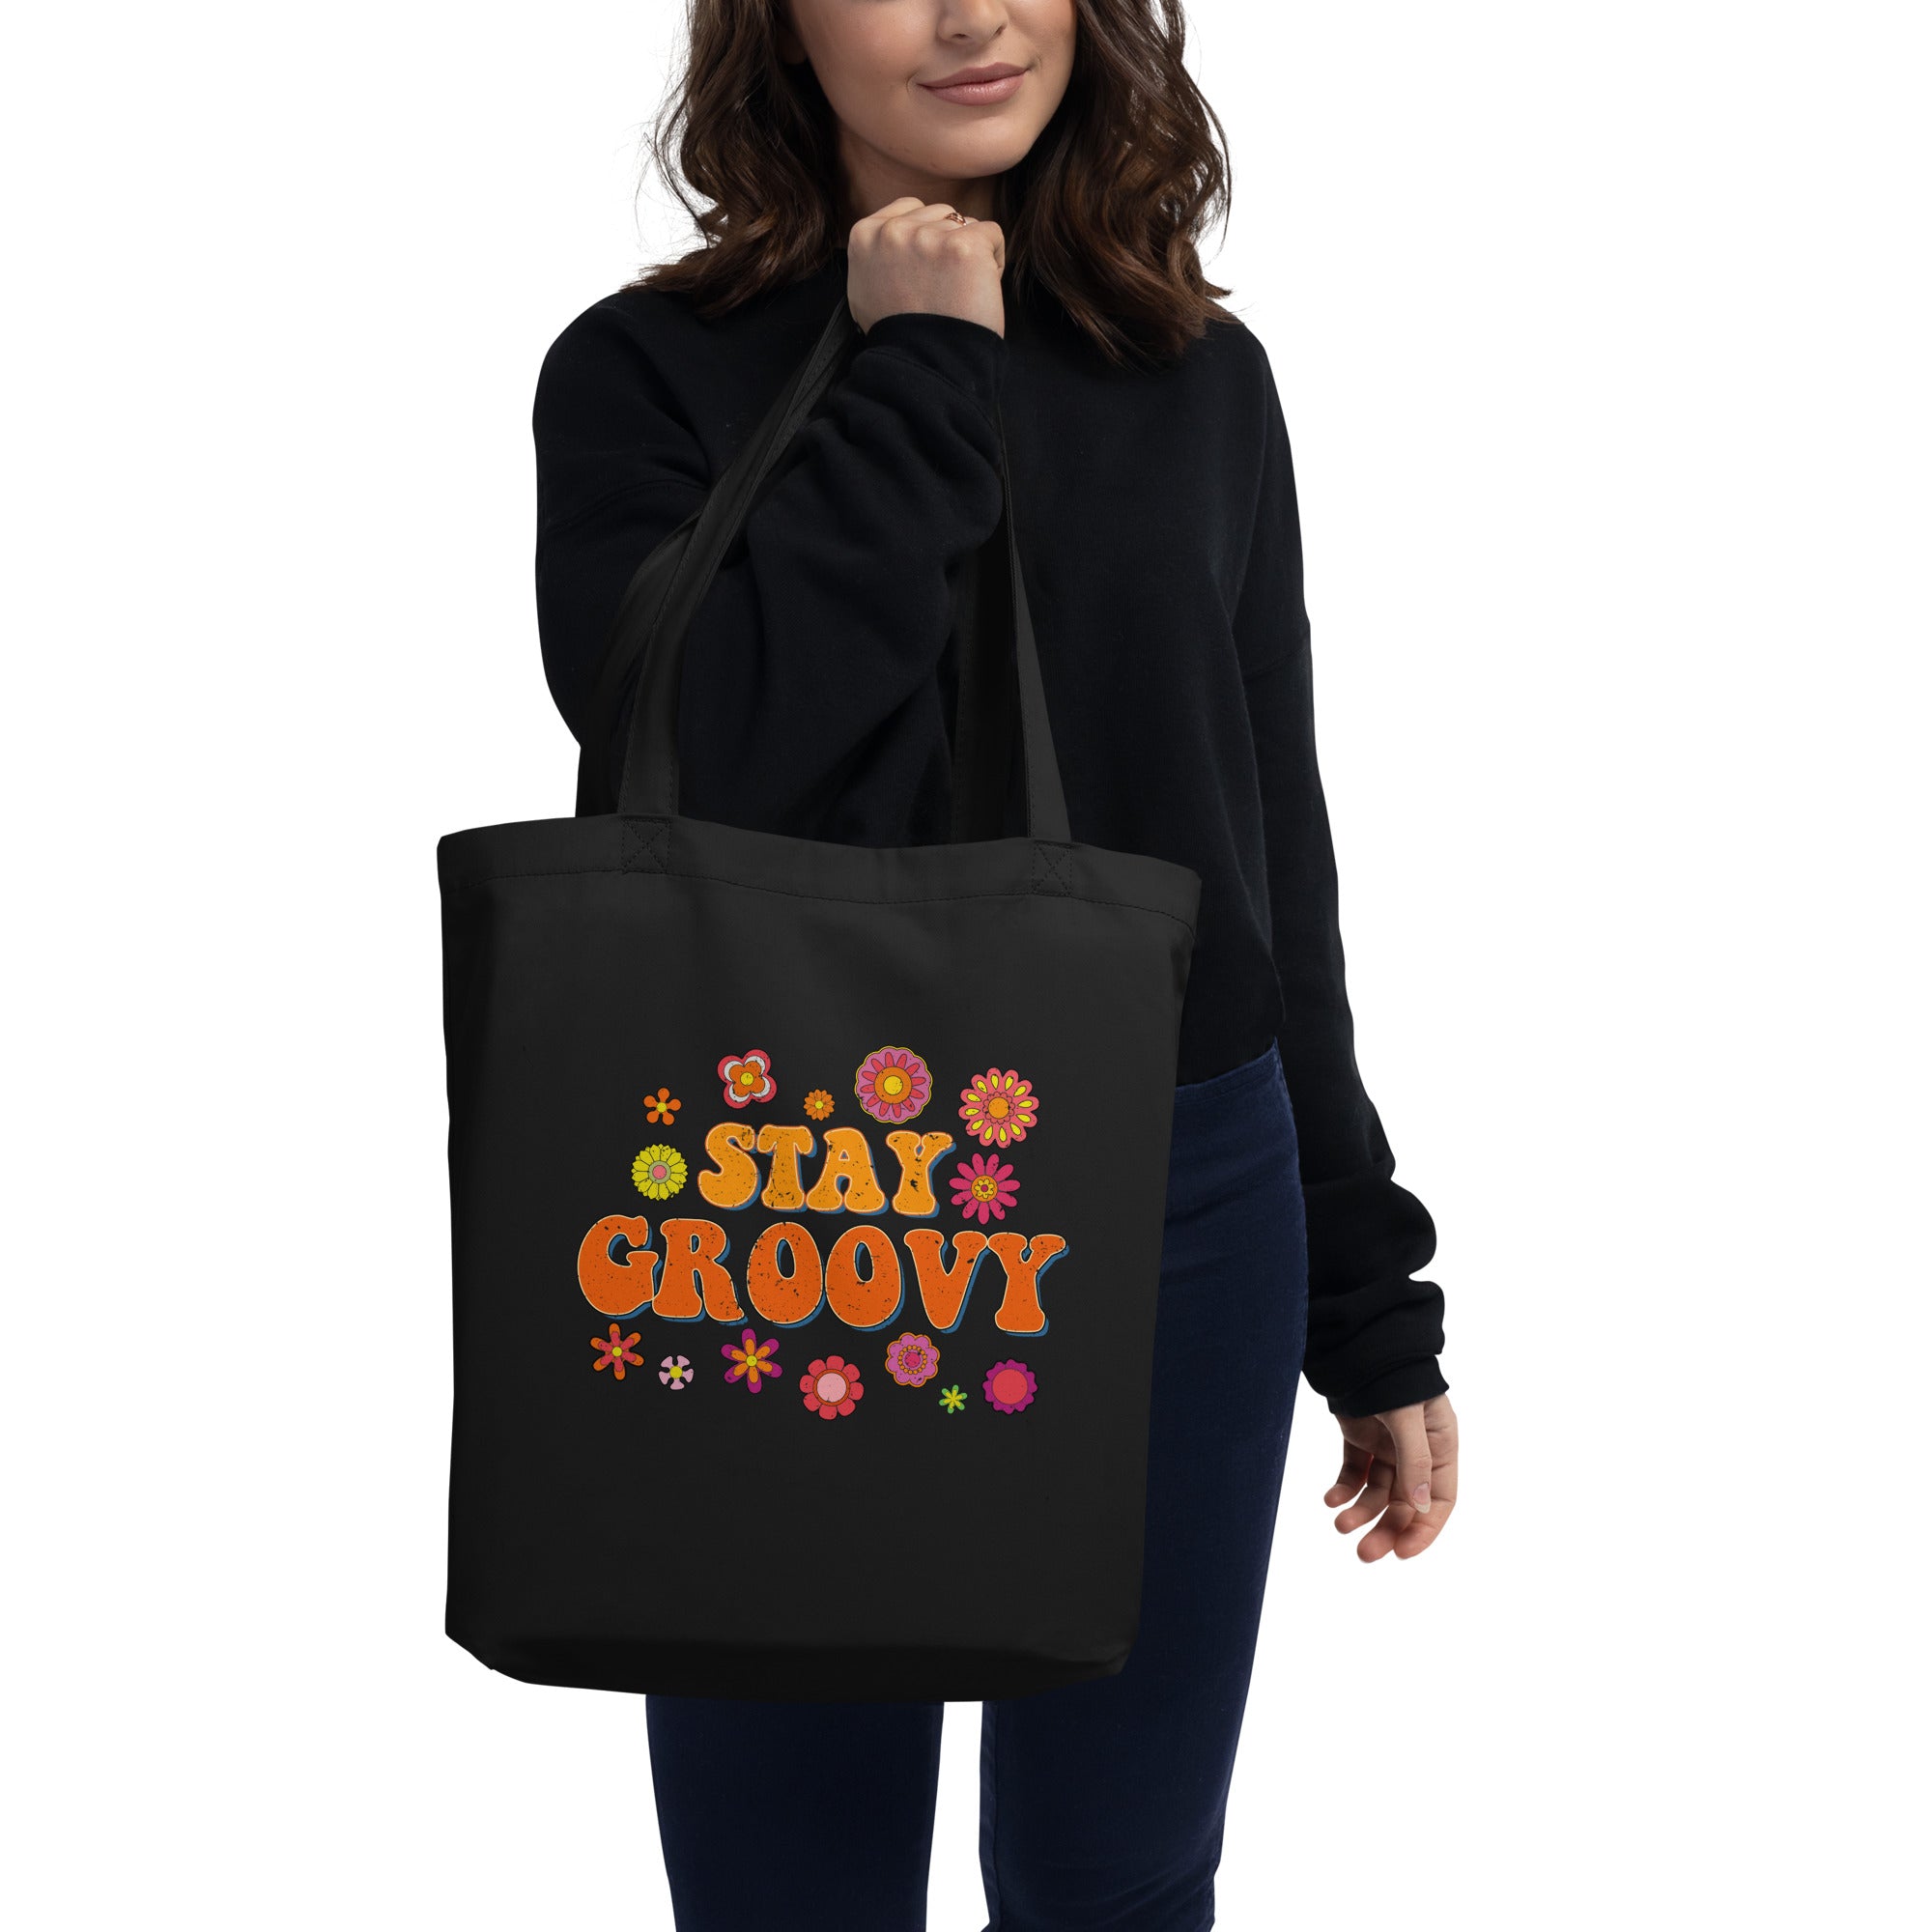 Stay Groovy - Eco Tote Bag